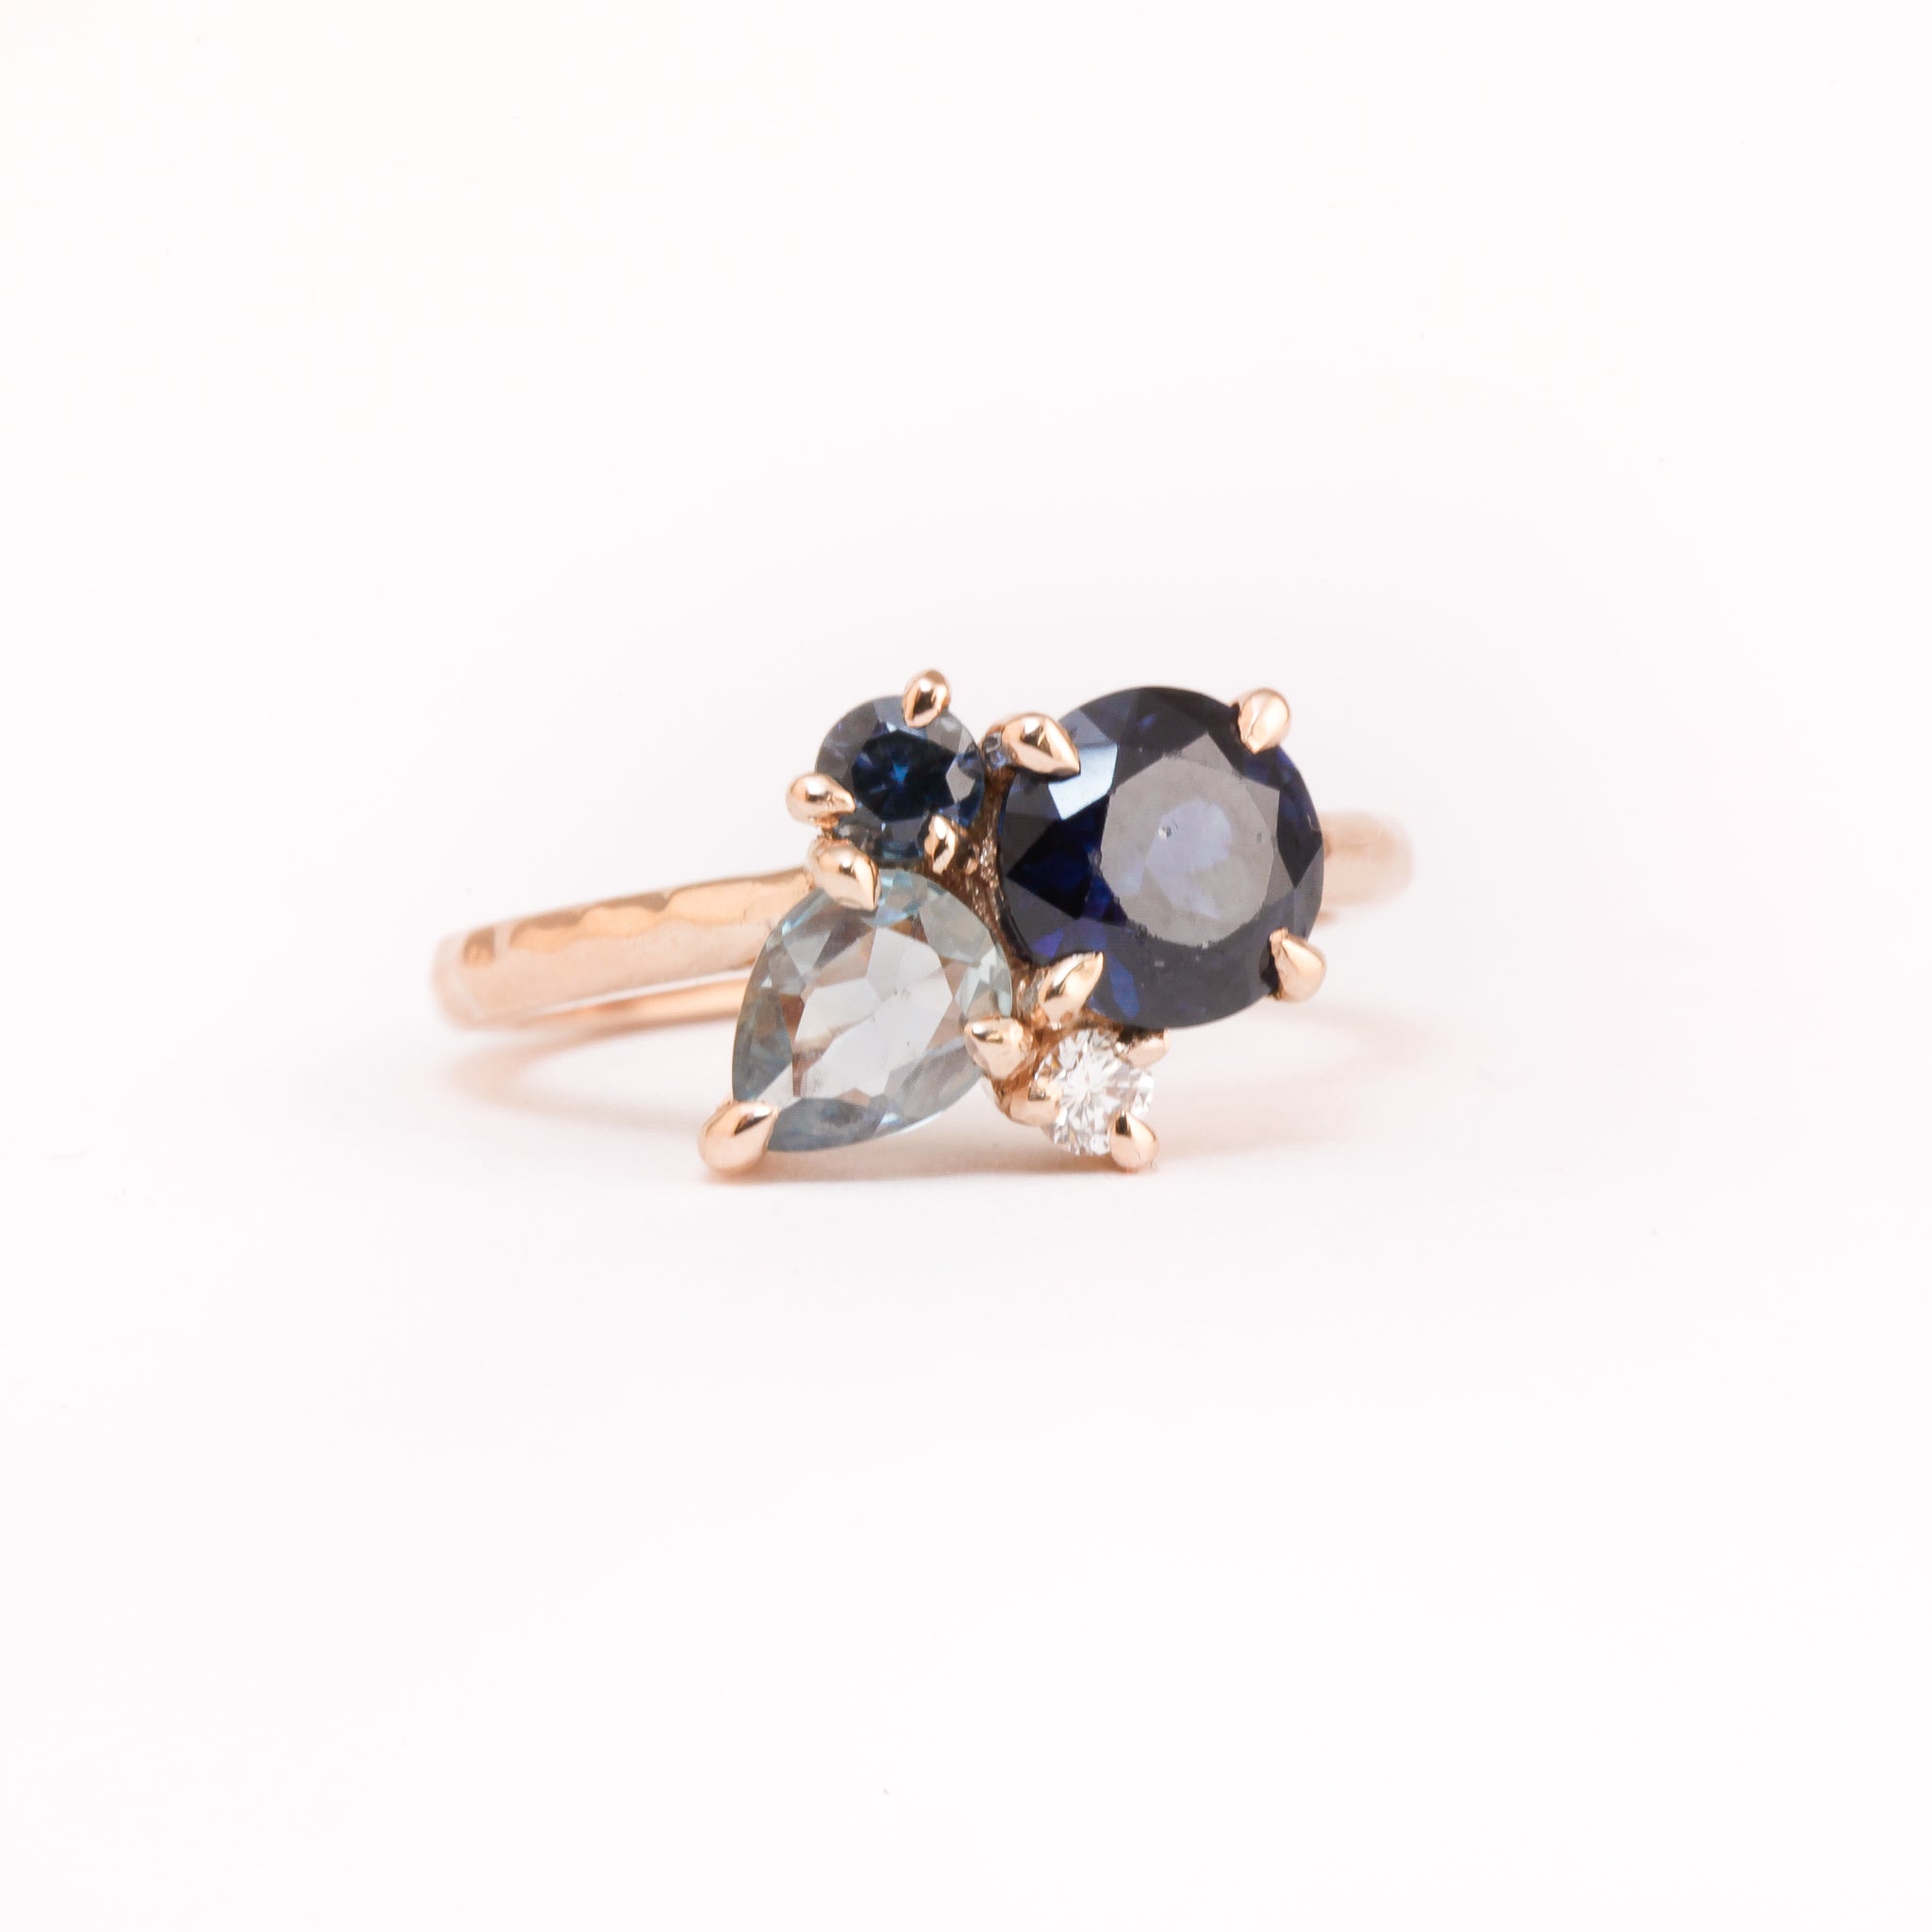 Fire and Ice Sapphire Engagement Ring with Black Diamonds – ARTEMER